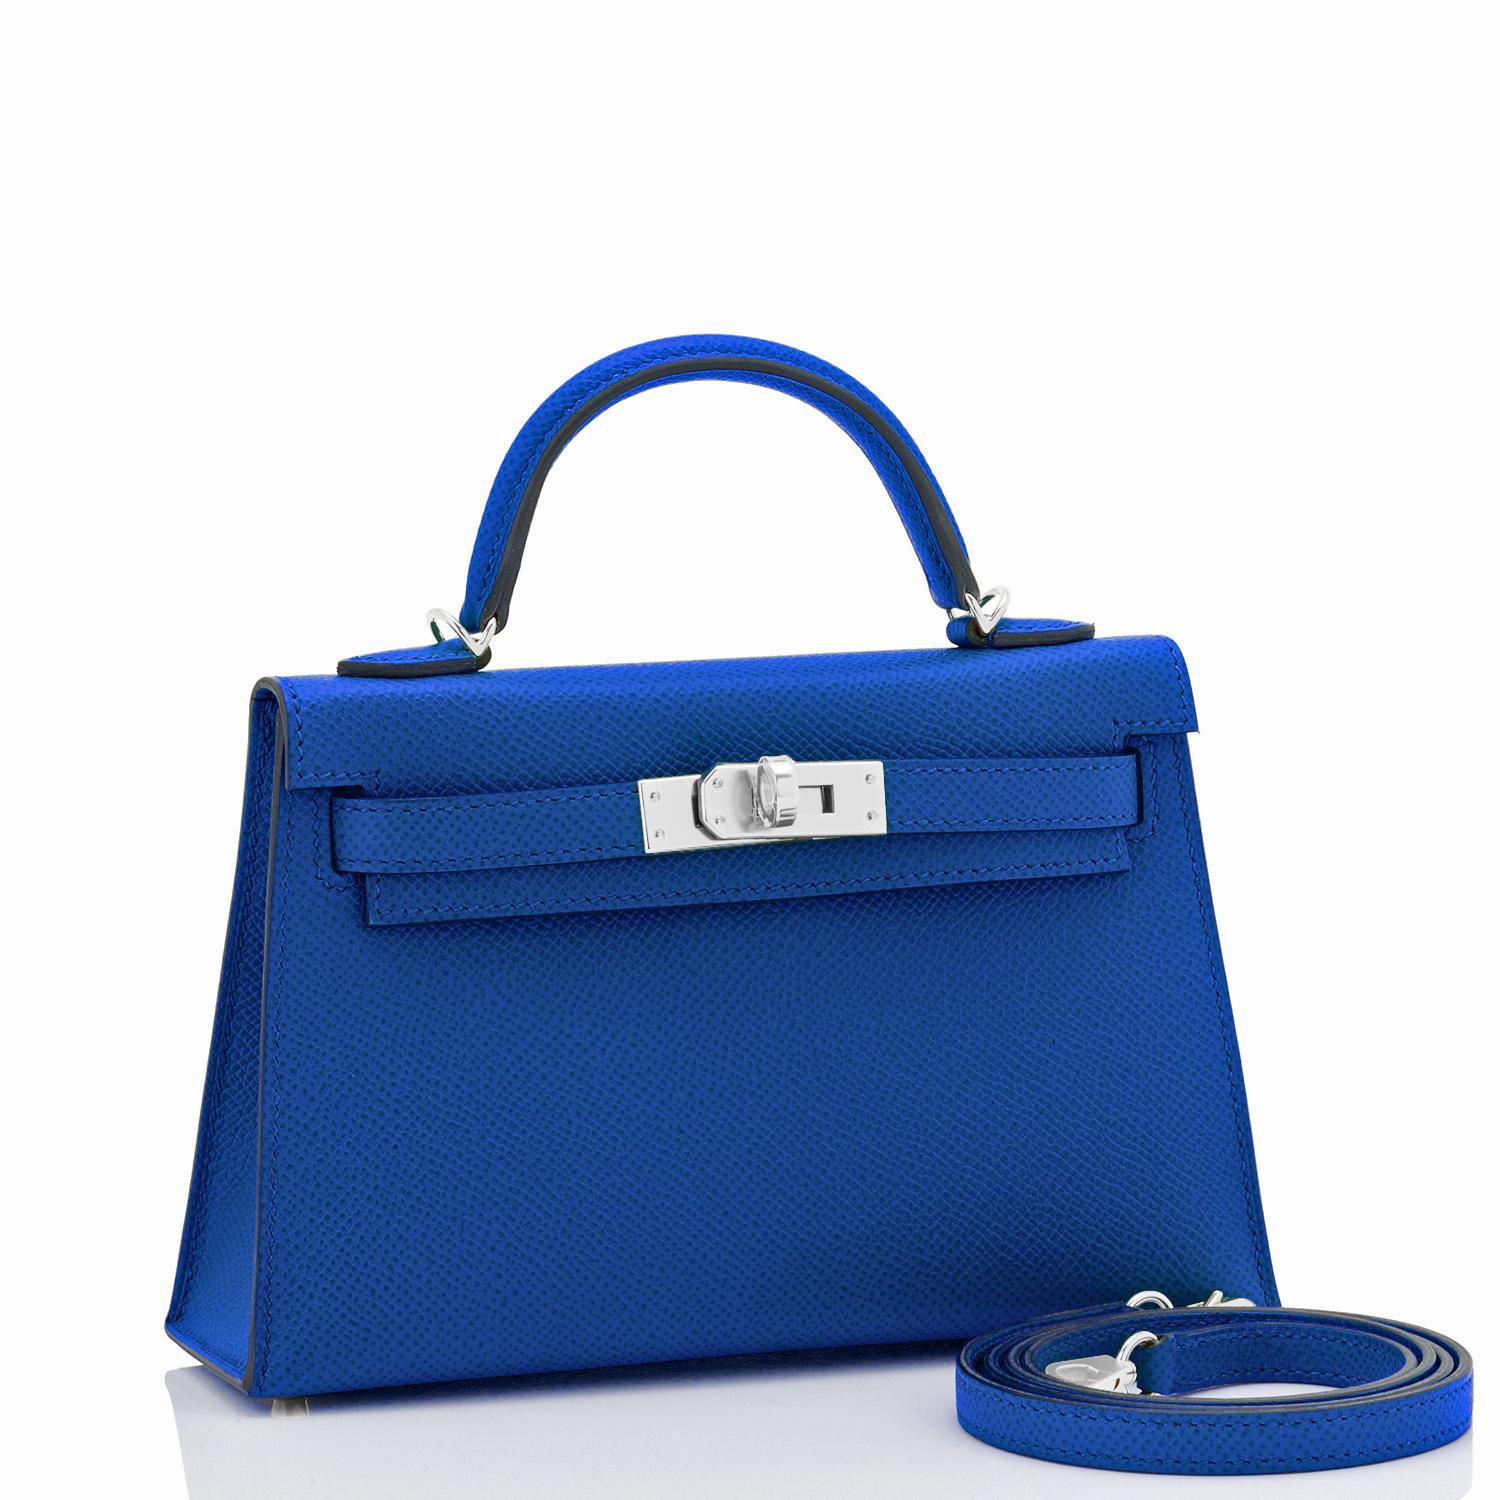 Hermes Mini Kelly 20cm Blue France VIP Epsom Sellier Bag, Z Stamp, 2021 
Just purchased from Hermes store; bag bears new 2021 Z Stamp.
Brand New in Box.  Store Fresh. Pristine Condition (with plastic on hardware)
Perfect gift! Comes full set with